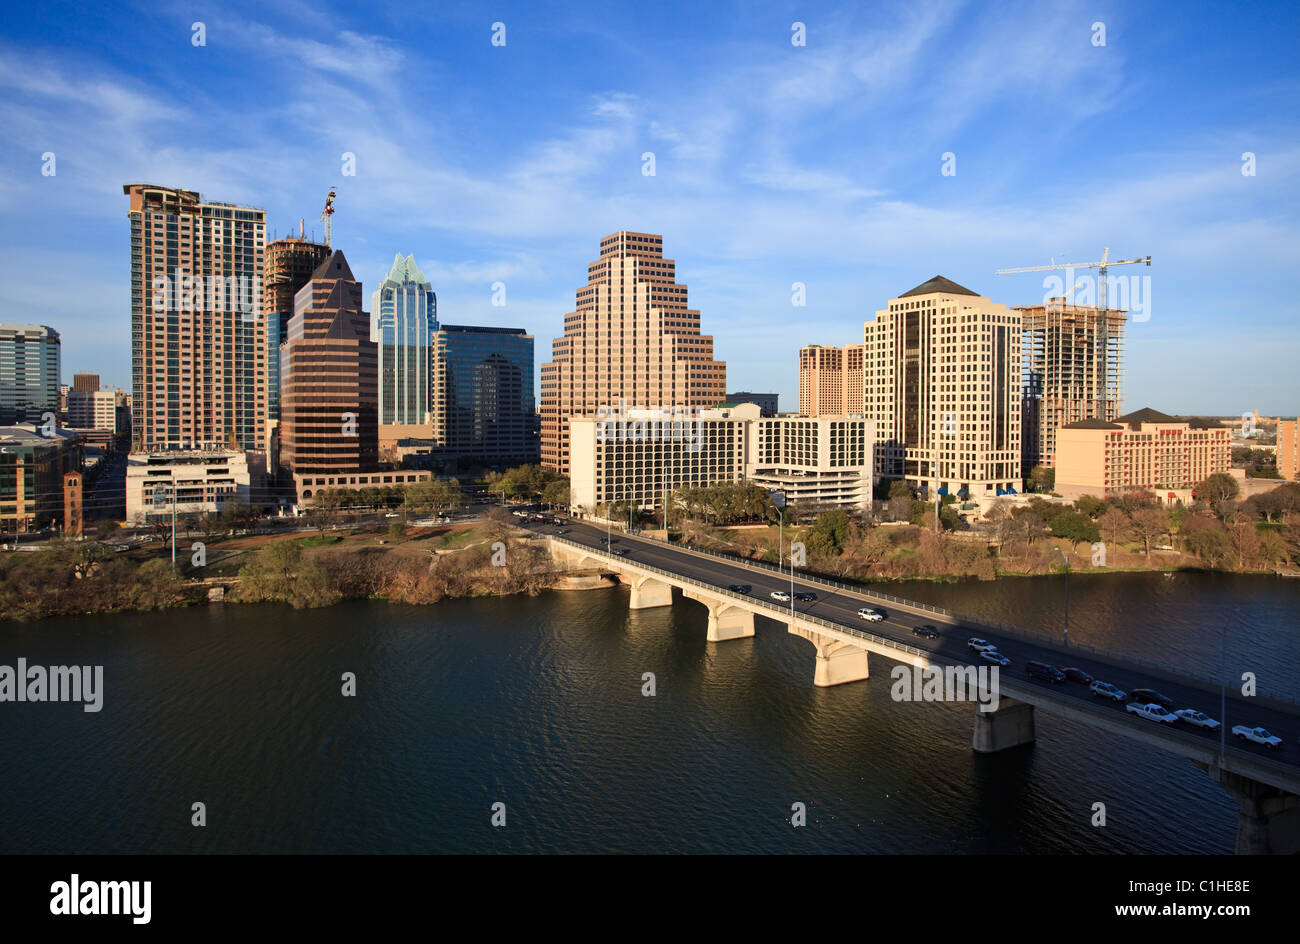 Downtown Austin Texas cityscape and skyline. A nice clear day by the lake in downtown Austin Texas. Stock Photo